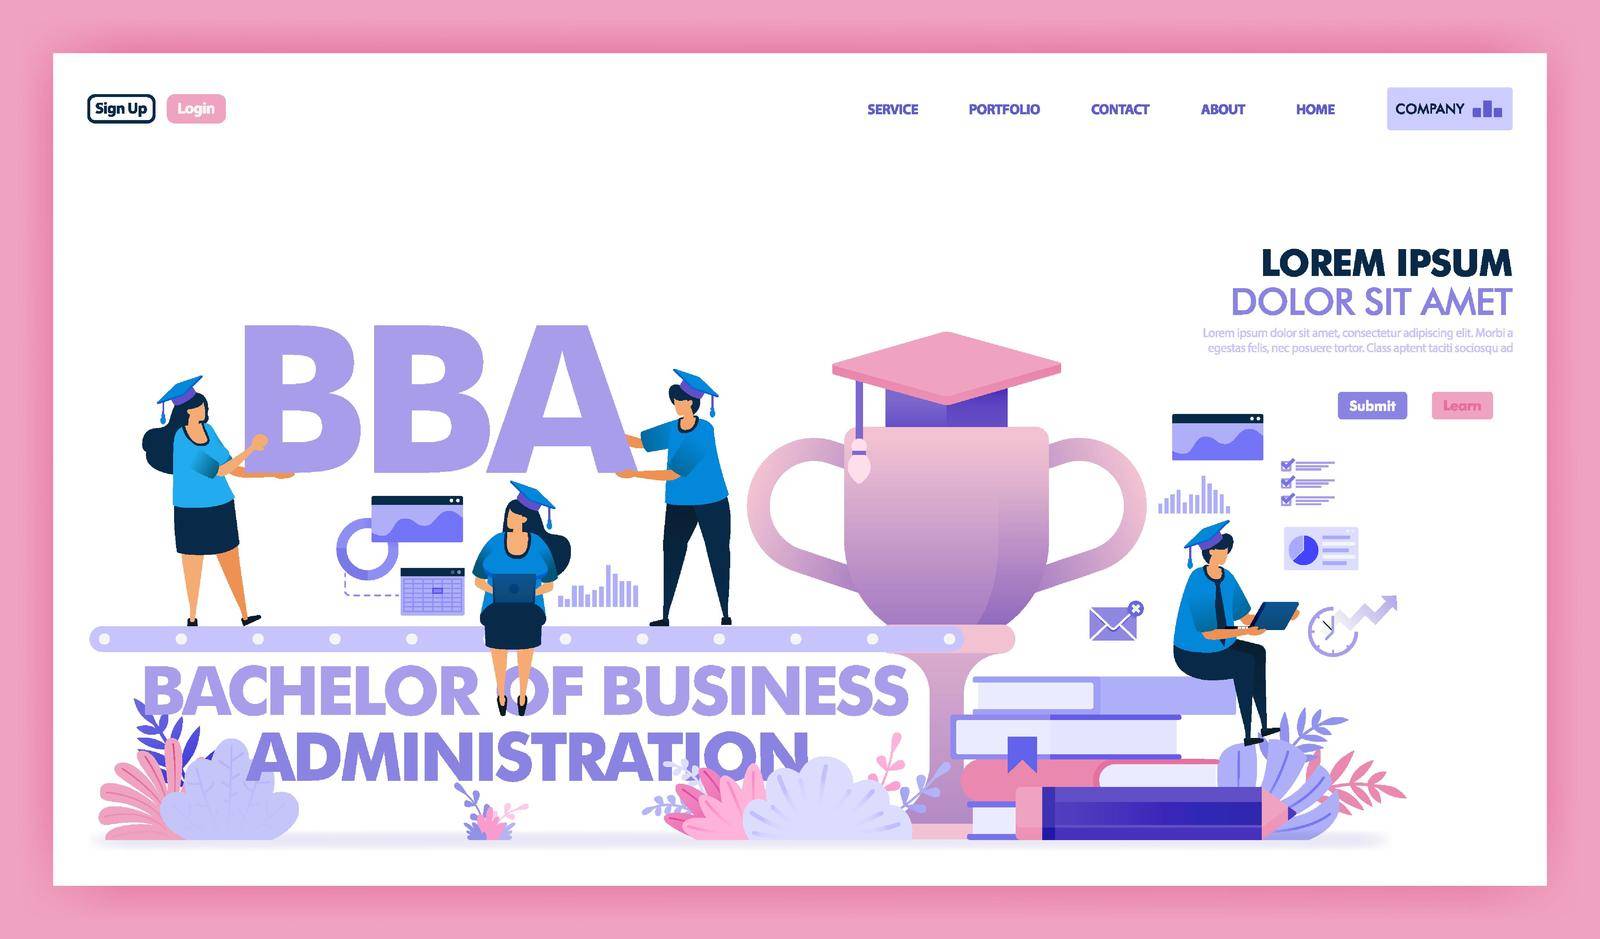 BBA or bachelor of business administration is a university program for business and economics, people learn to get a degree master of business administration or MBA. Flat illustration vector design. by yayimage